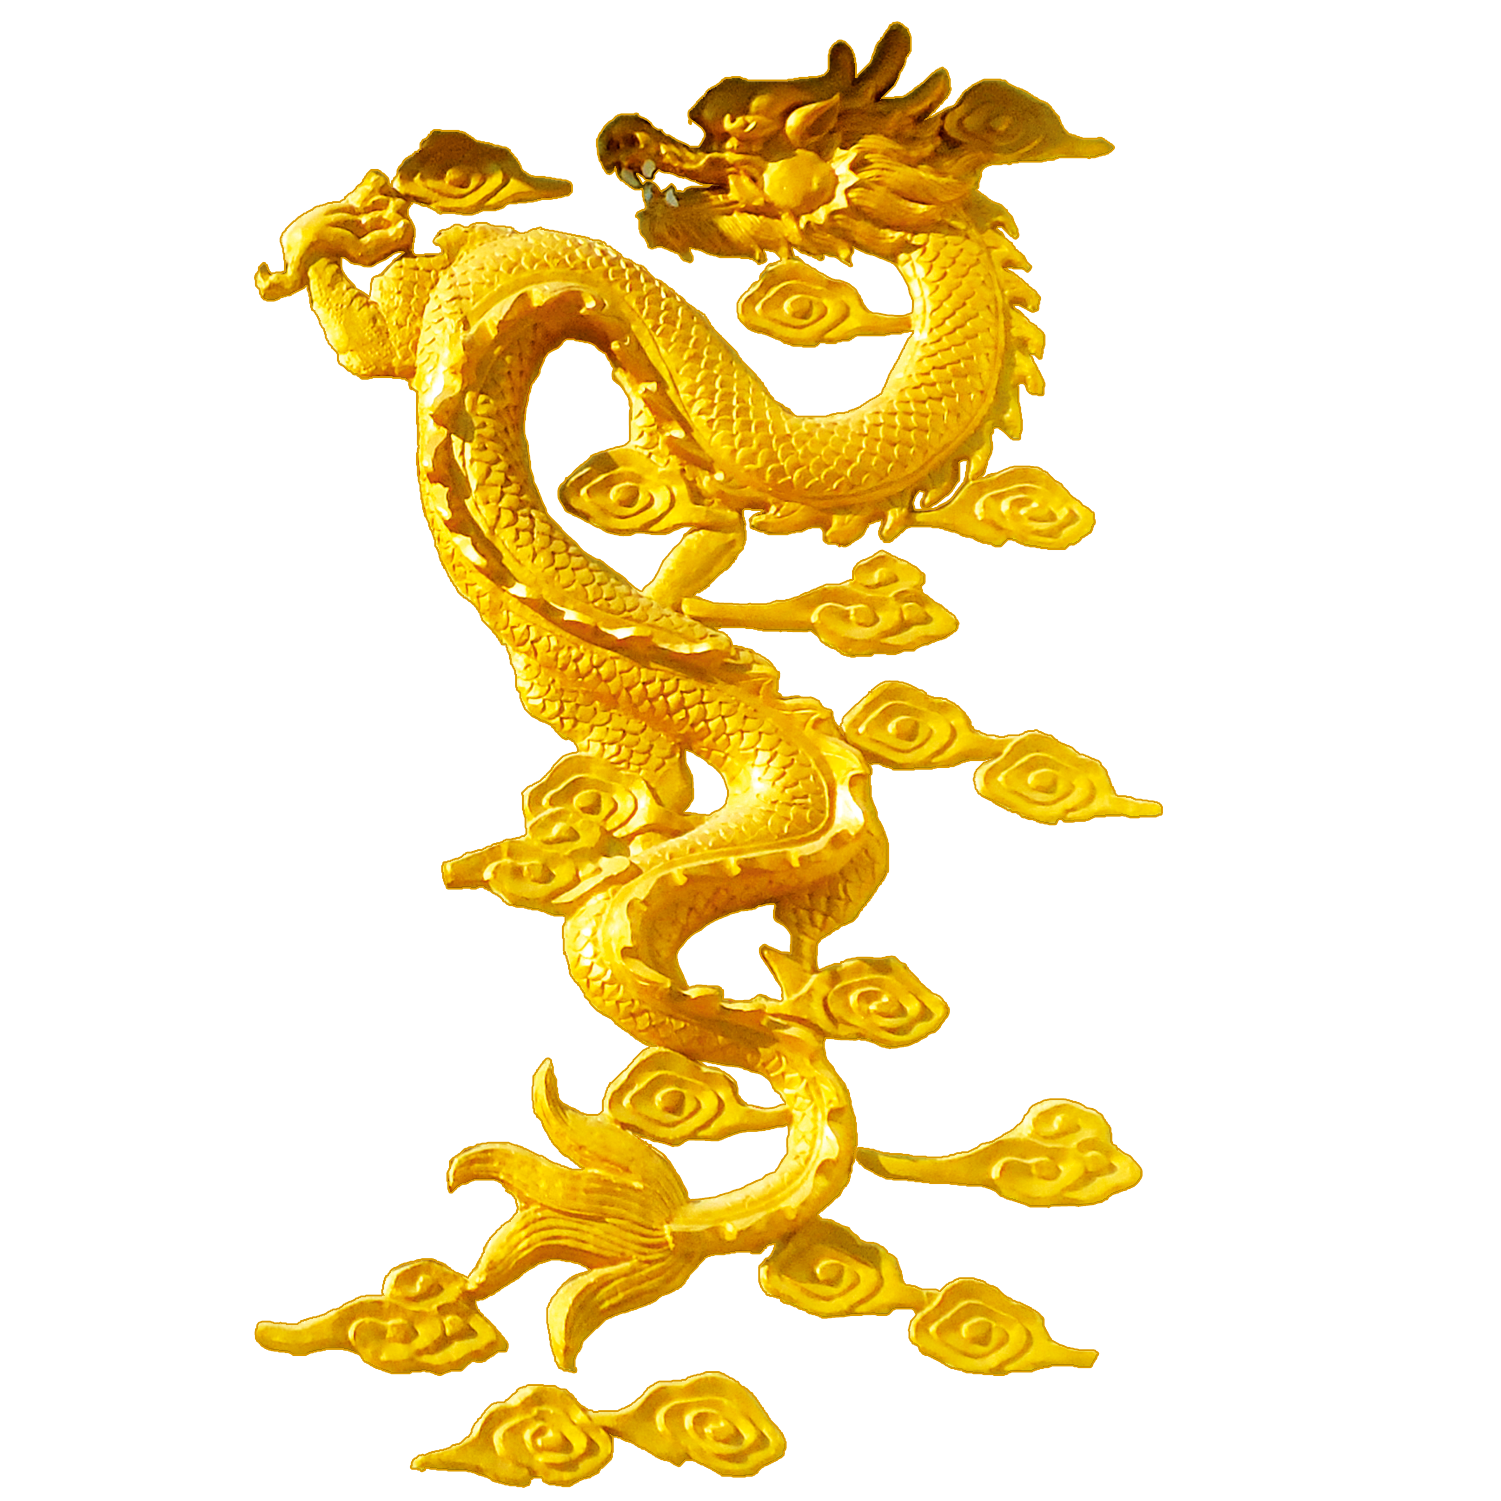 Chinese dragon - Golden dragon png download - 1501*1501 - Free ...